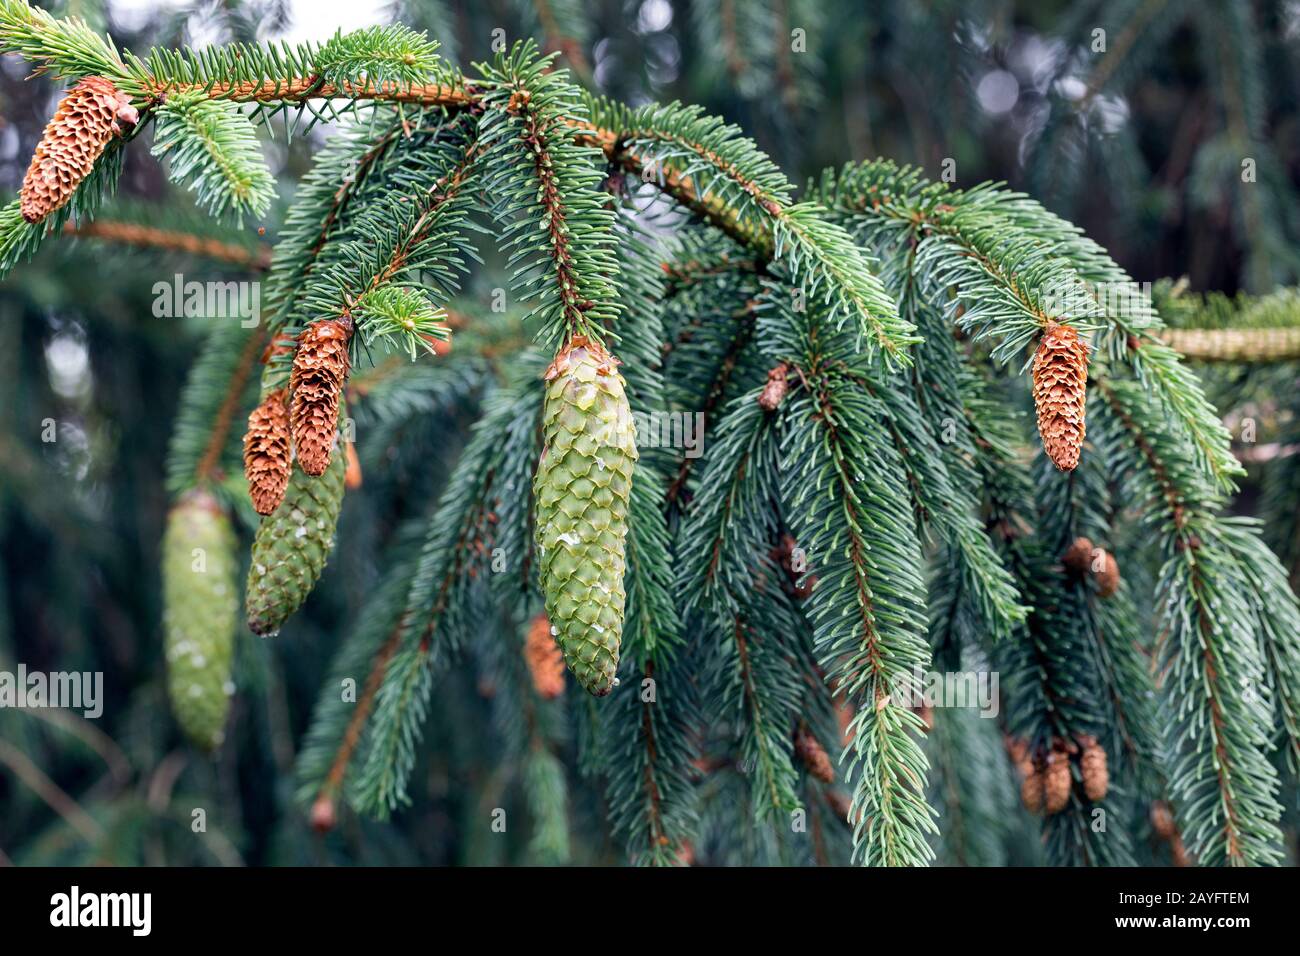 Norway spruce (Picea abies), branch iwth cones, Germany Stock Photo